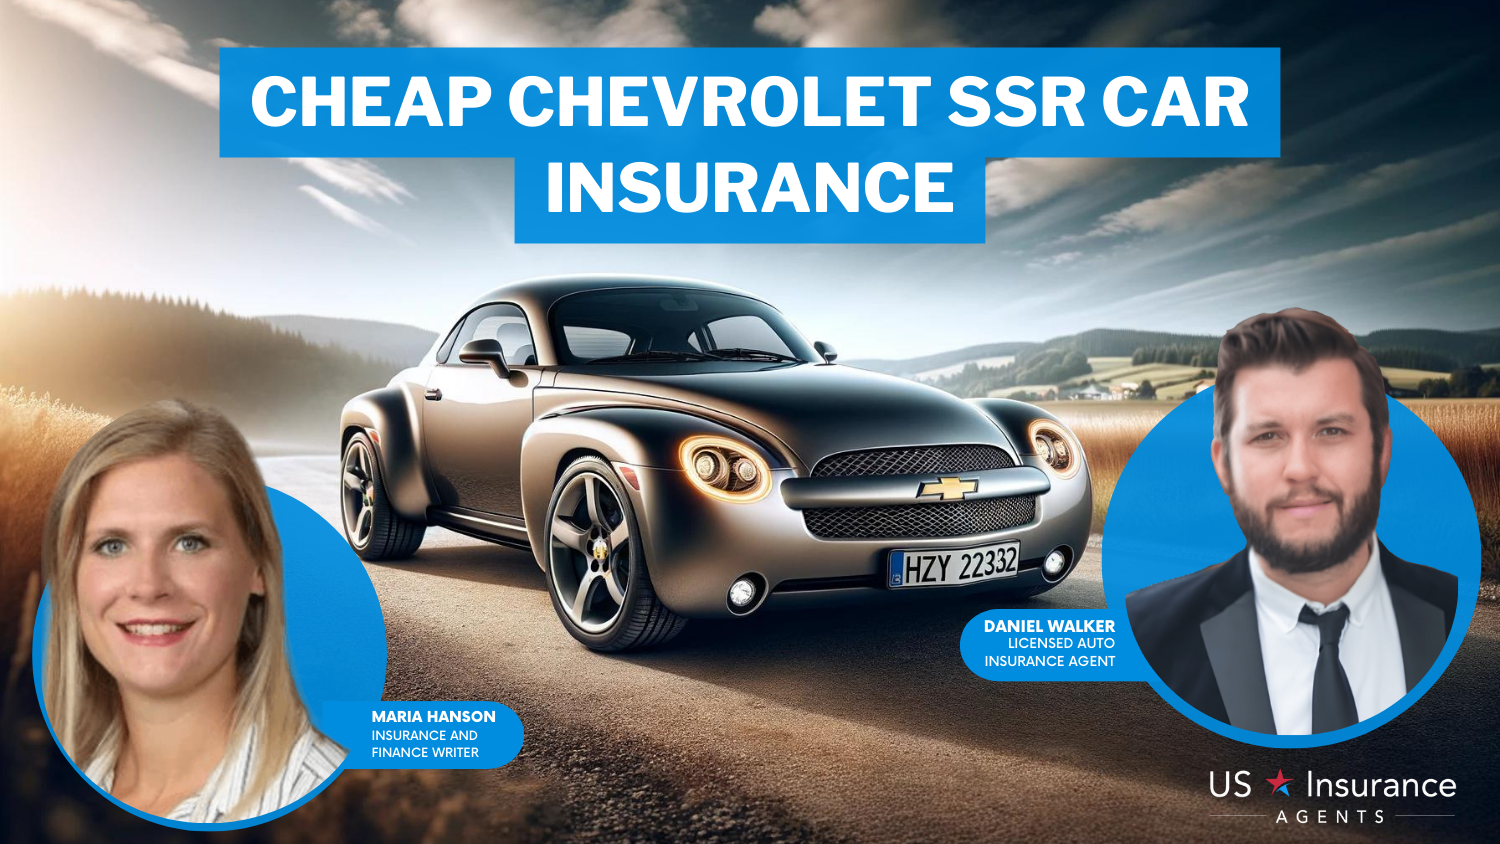 Cheap Chevrolet SSR Car Insurance: Erie, Auto-Owners, and Mercury